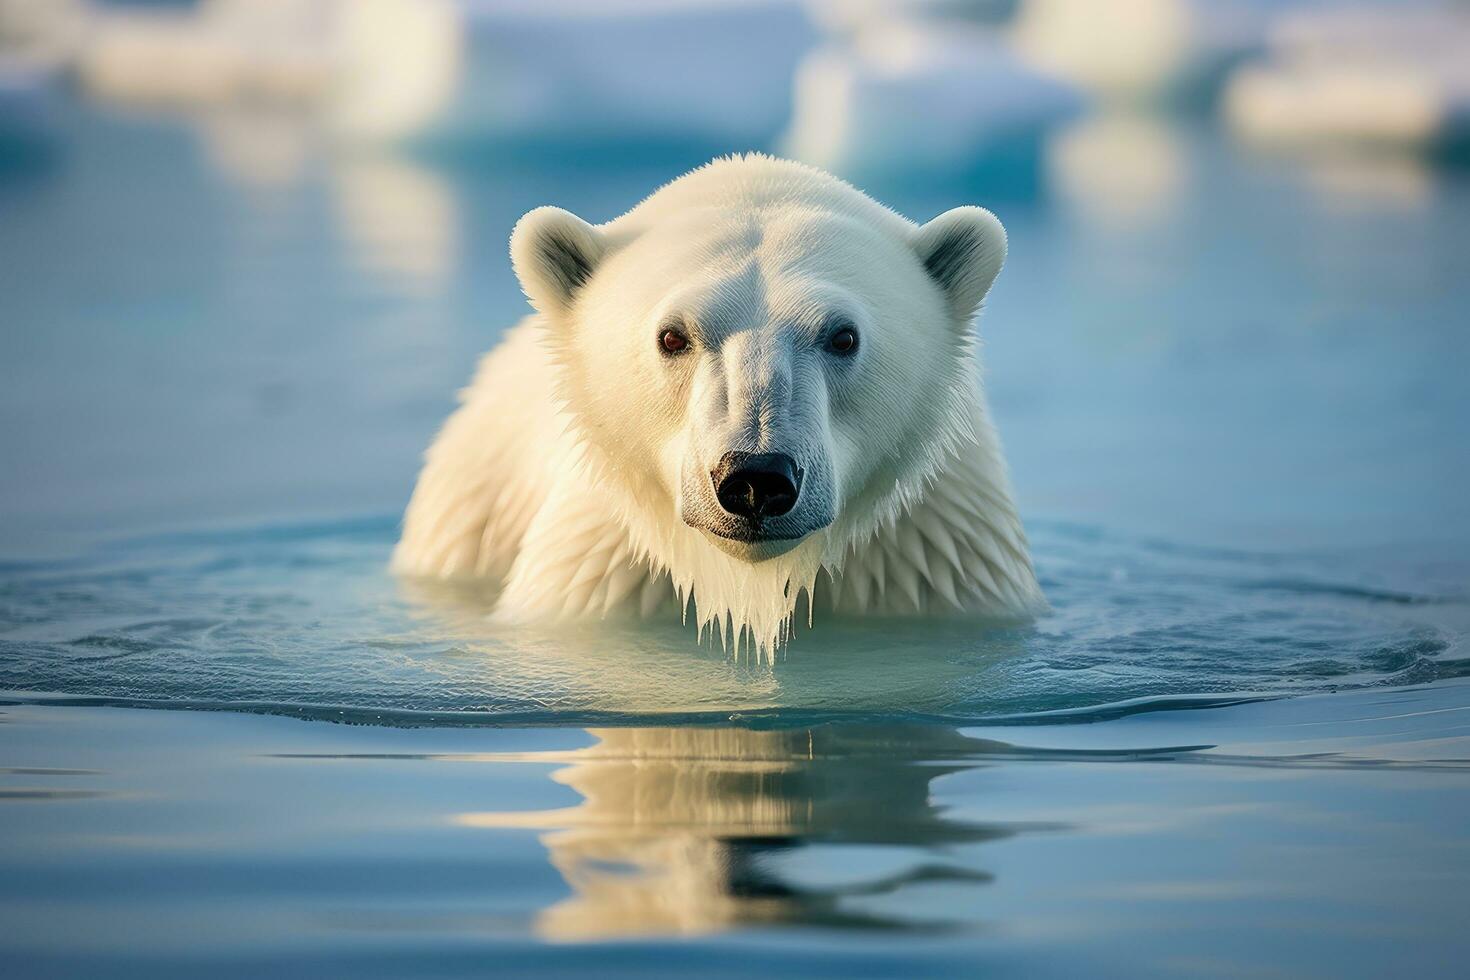 Polar bear Ursus maritimus swimming in the water, A whimsical image of a stranded polar bear, stranded on a barren island. The bear stands surrounded by the beautiful, AI Generated photo